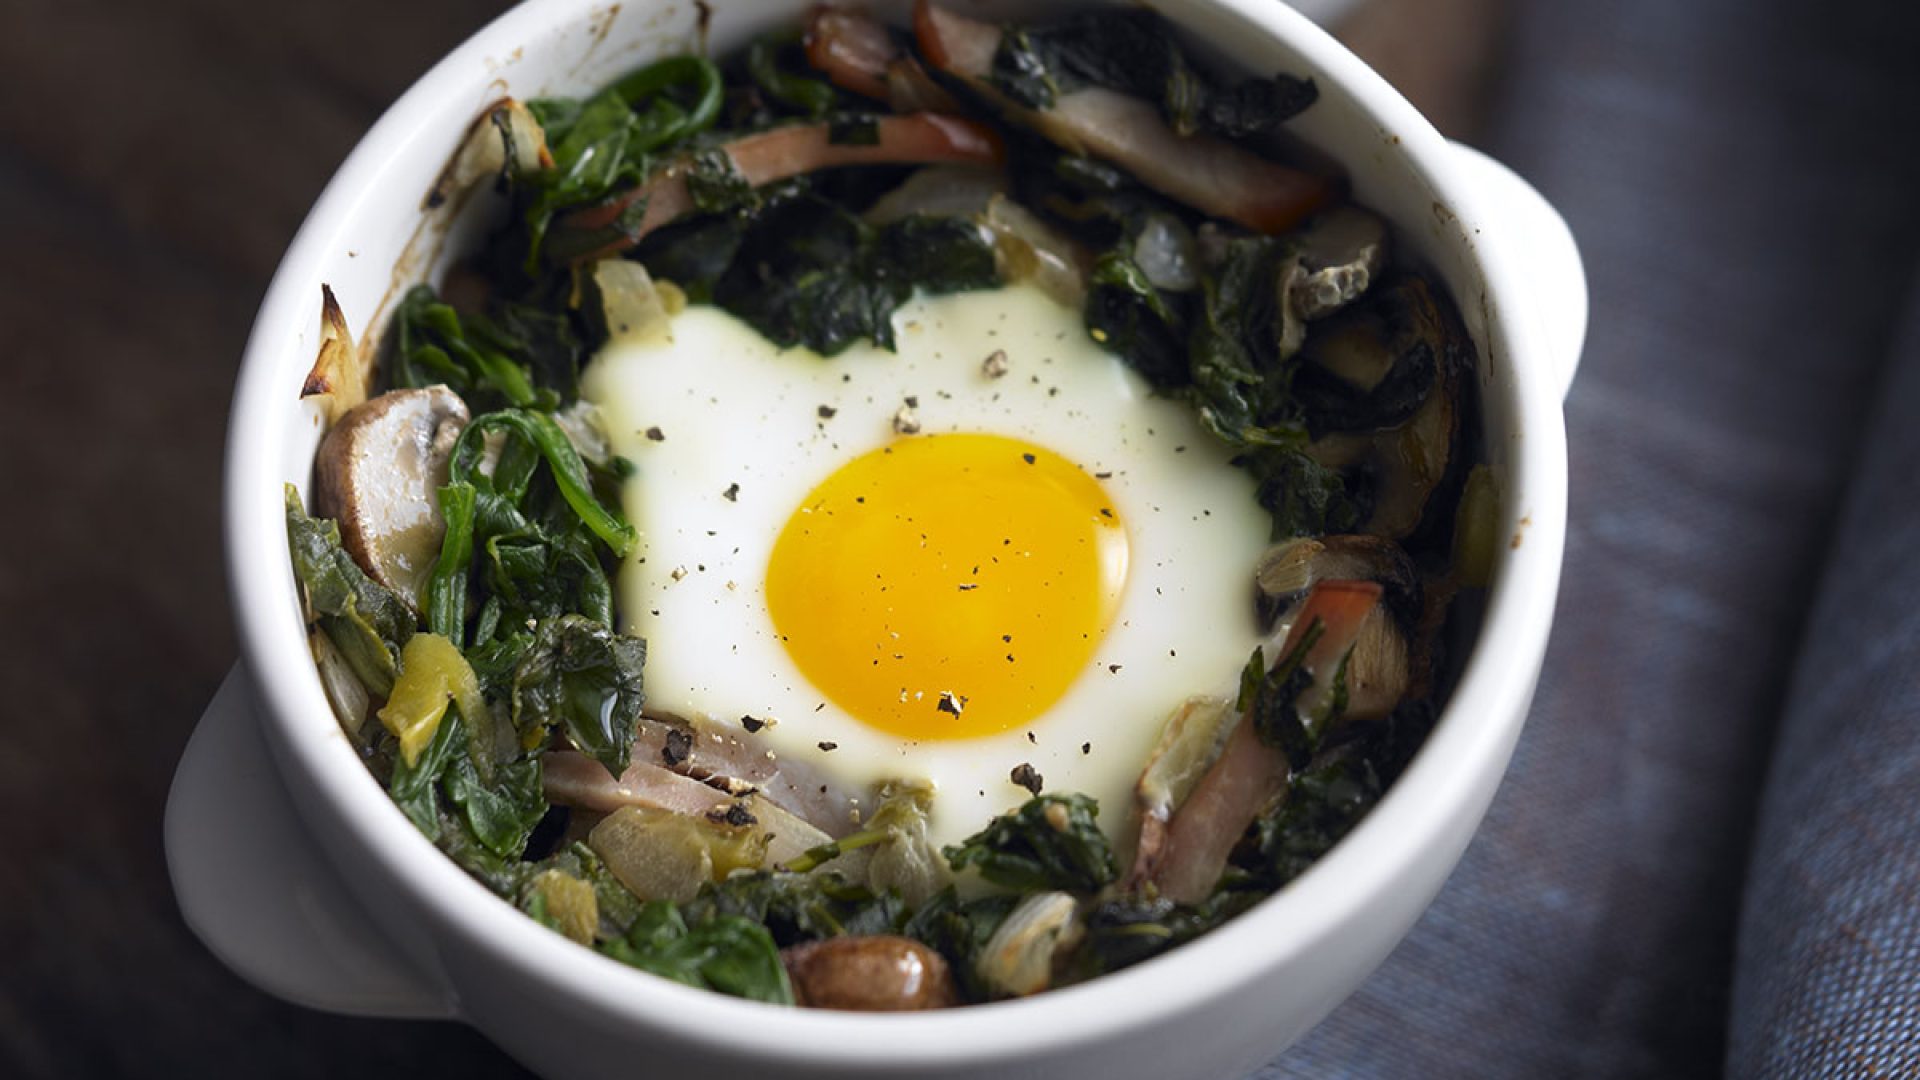 Baked Egg With Mushrooms And Spinach Recipe Eat This Not That